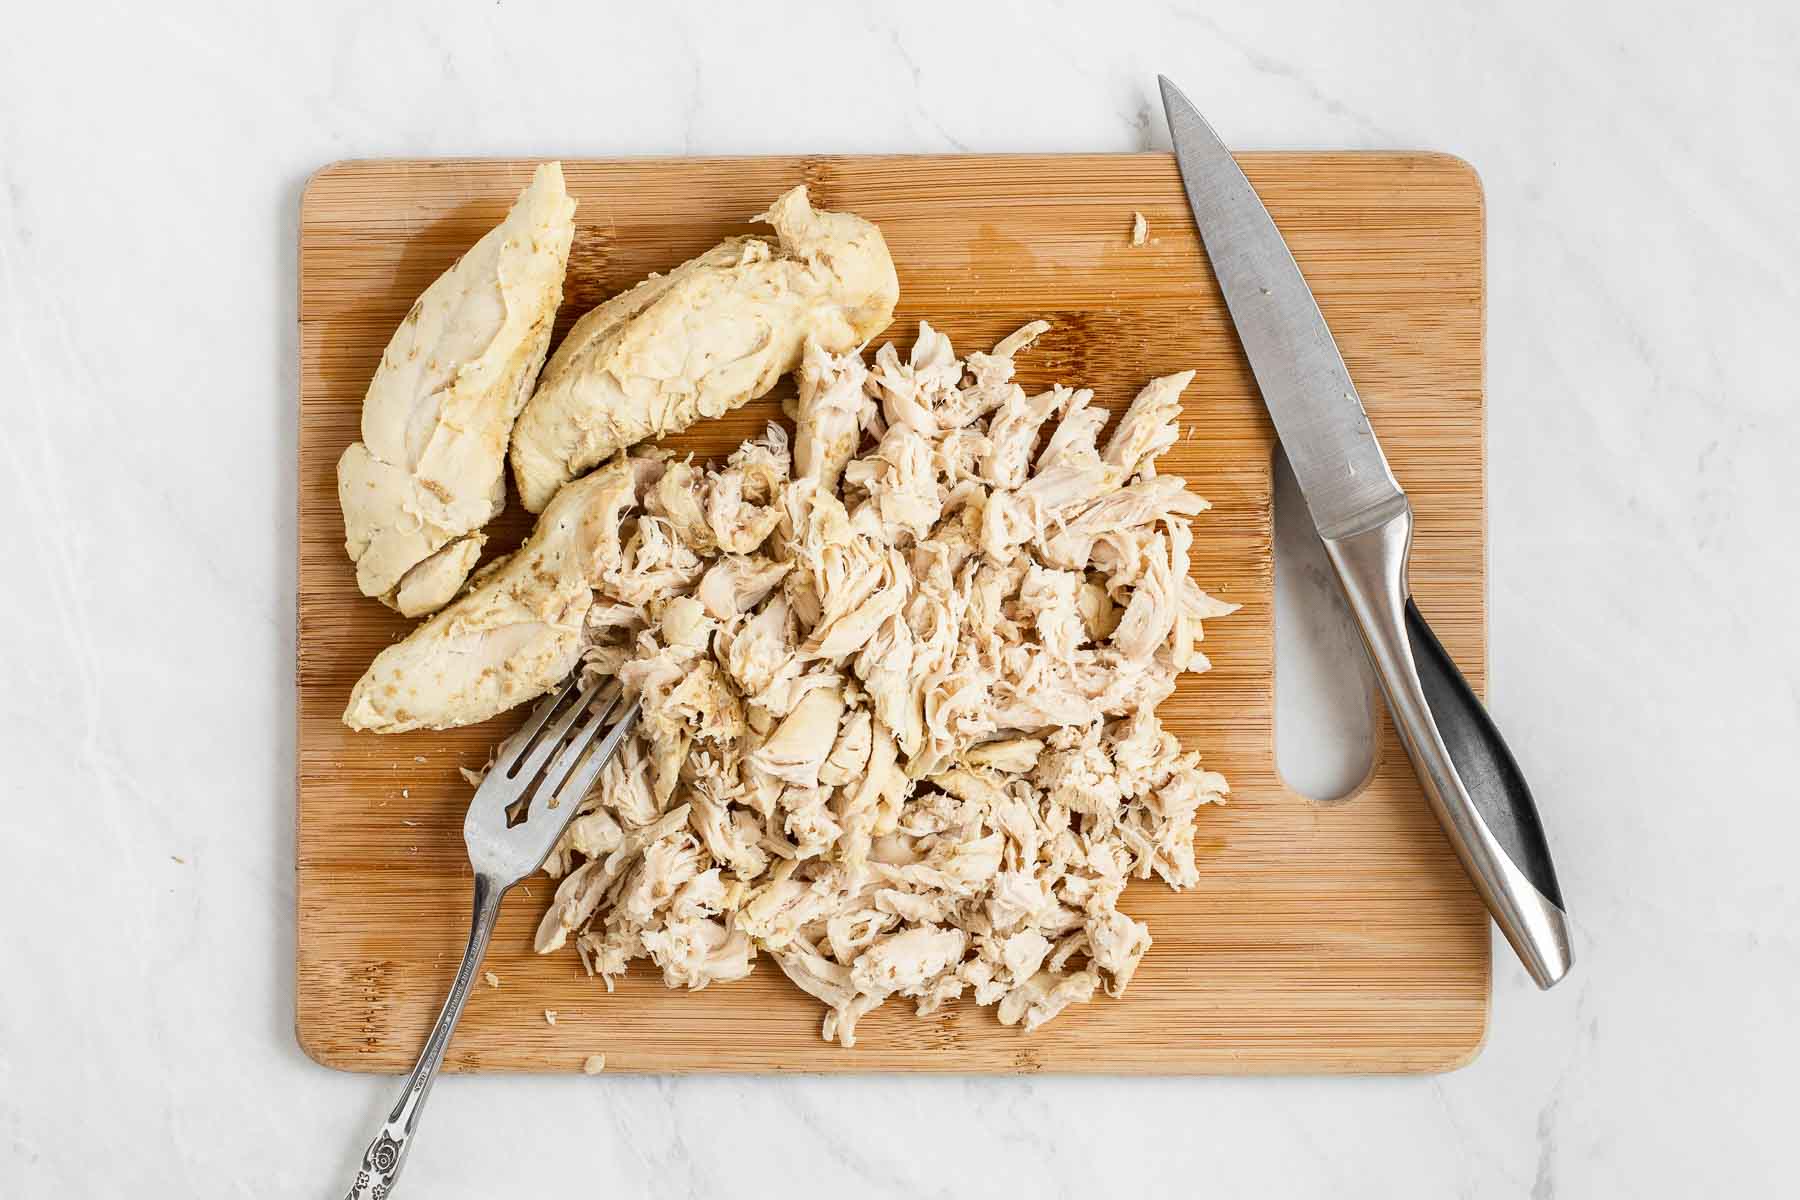 Cooked chicken, being shredded on a wooden cutting board with knife.